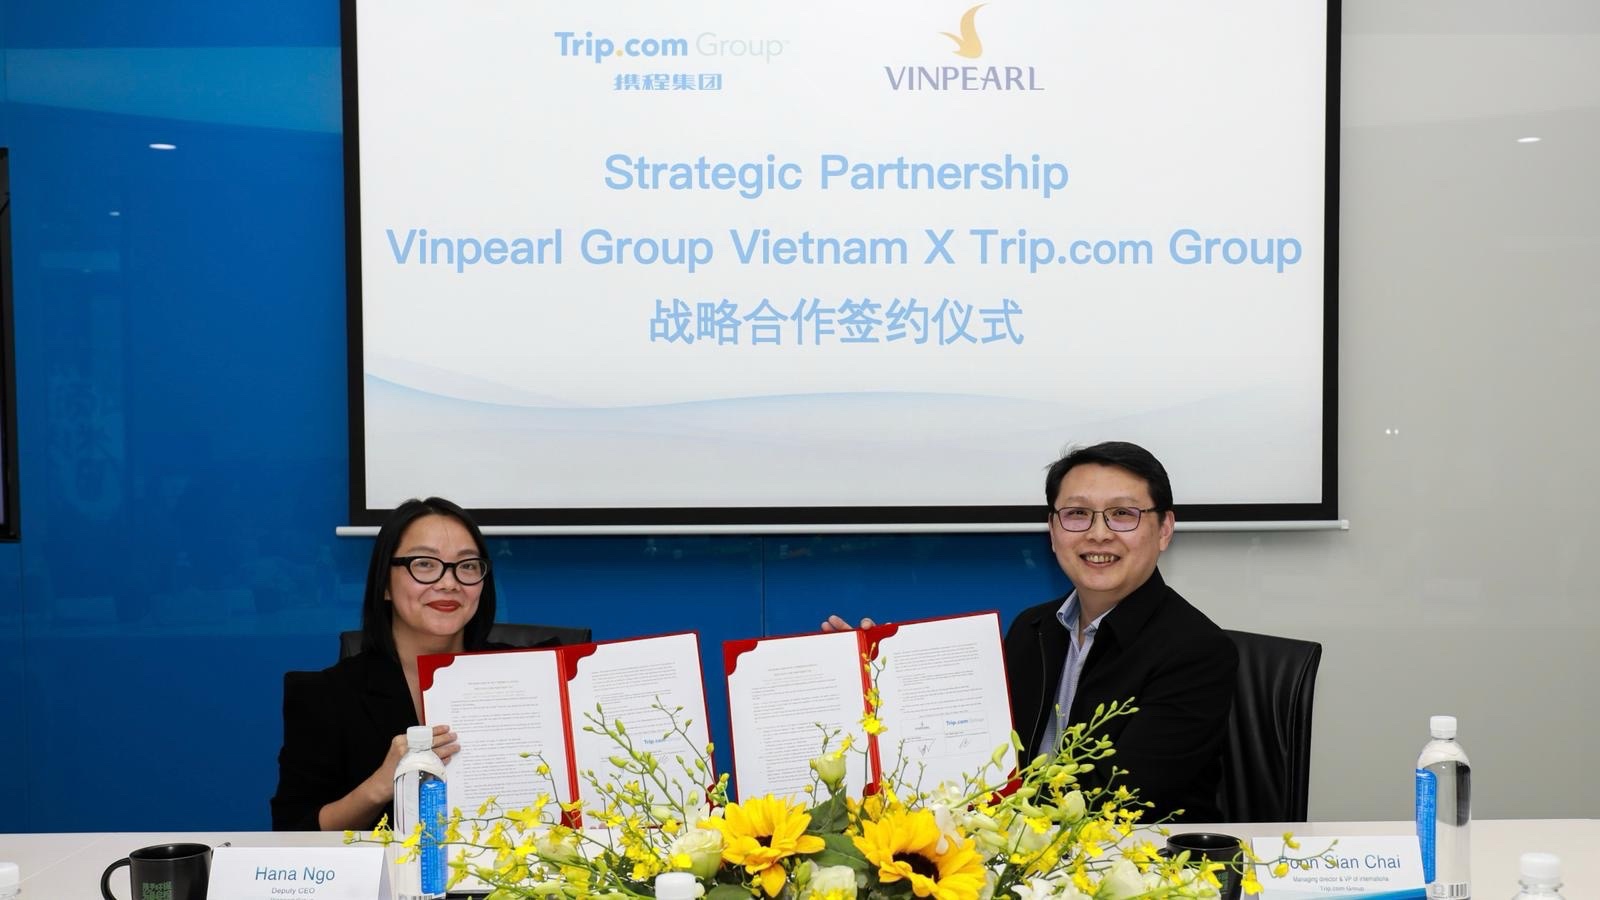 Trip.com Group and Vinpearl ink new strategic partnership